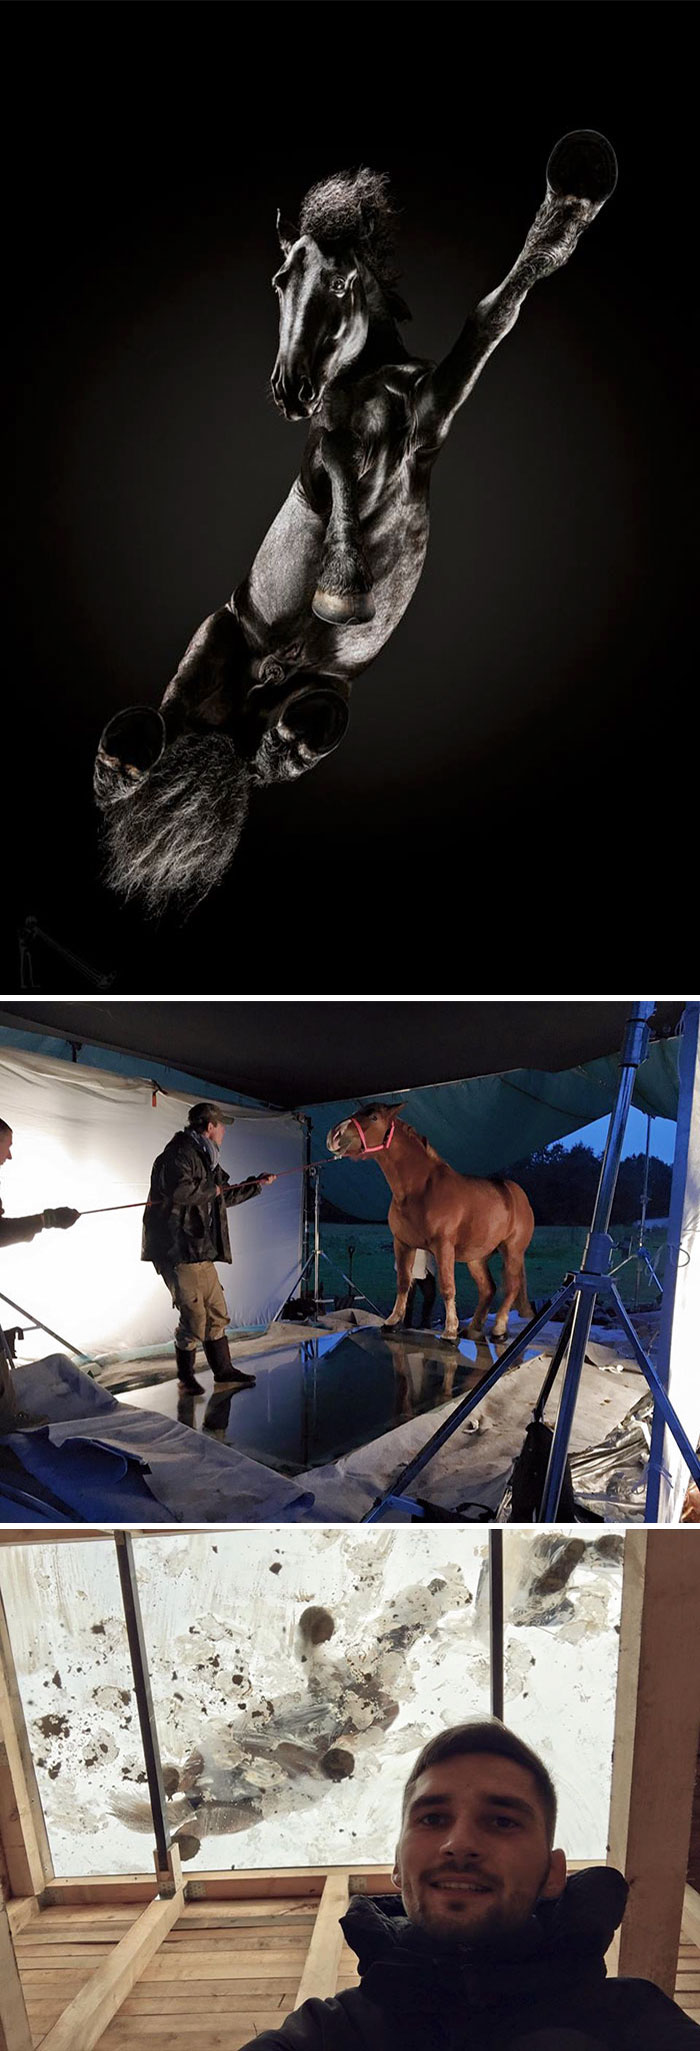 Behind The Scenes Of Beautiful Photos (27 pics)